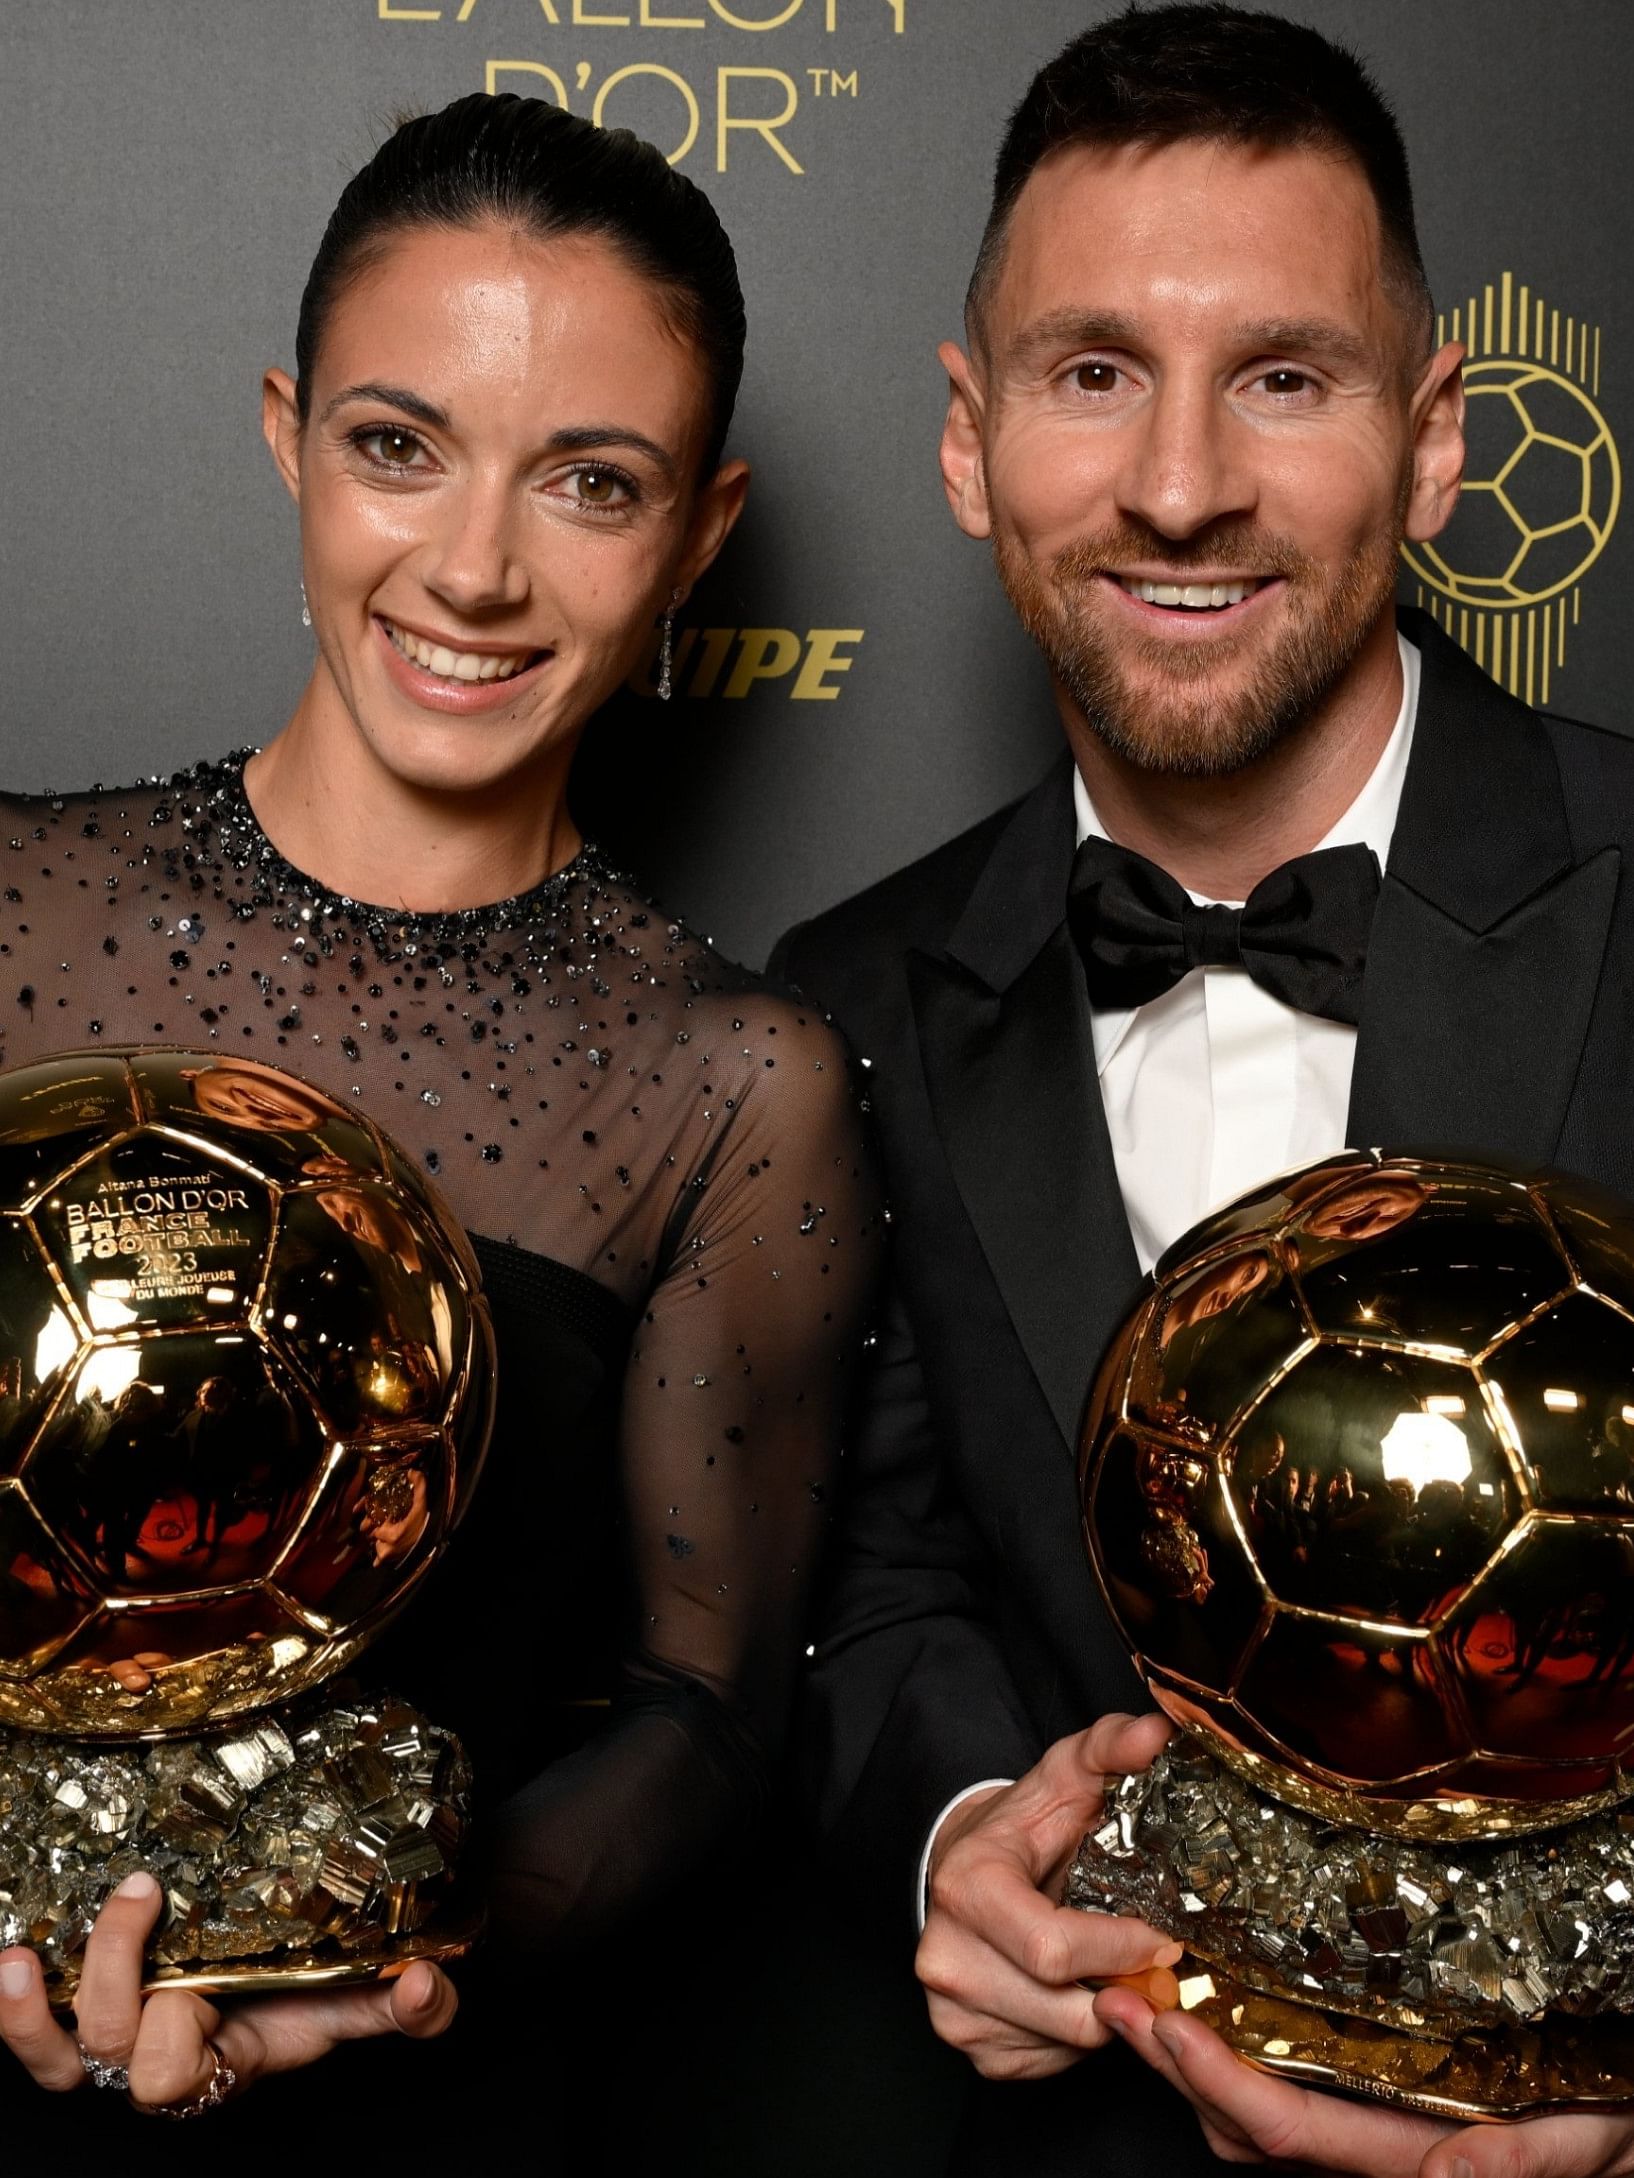 Lionel Messi ballon d'or 2023: Lionel Messi wins 2023 Ballon d'Or, reports  suggest. Know shortlisted candidates - The Economic Times